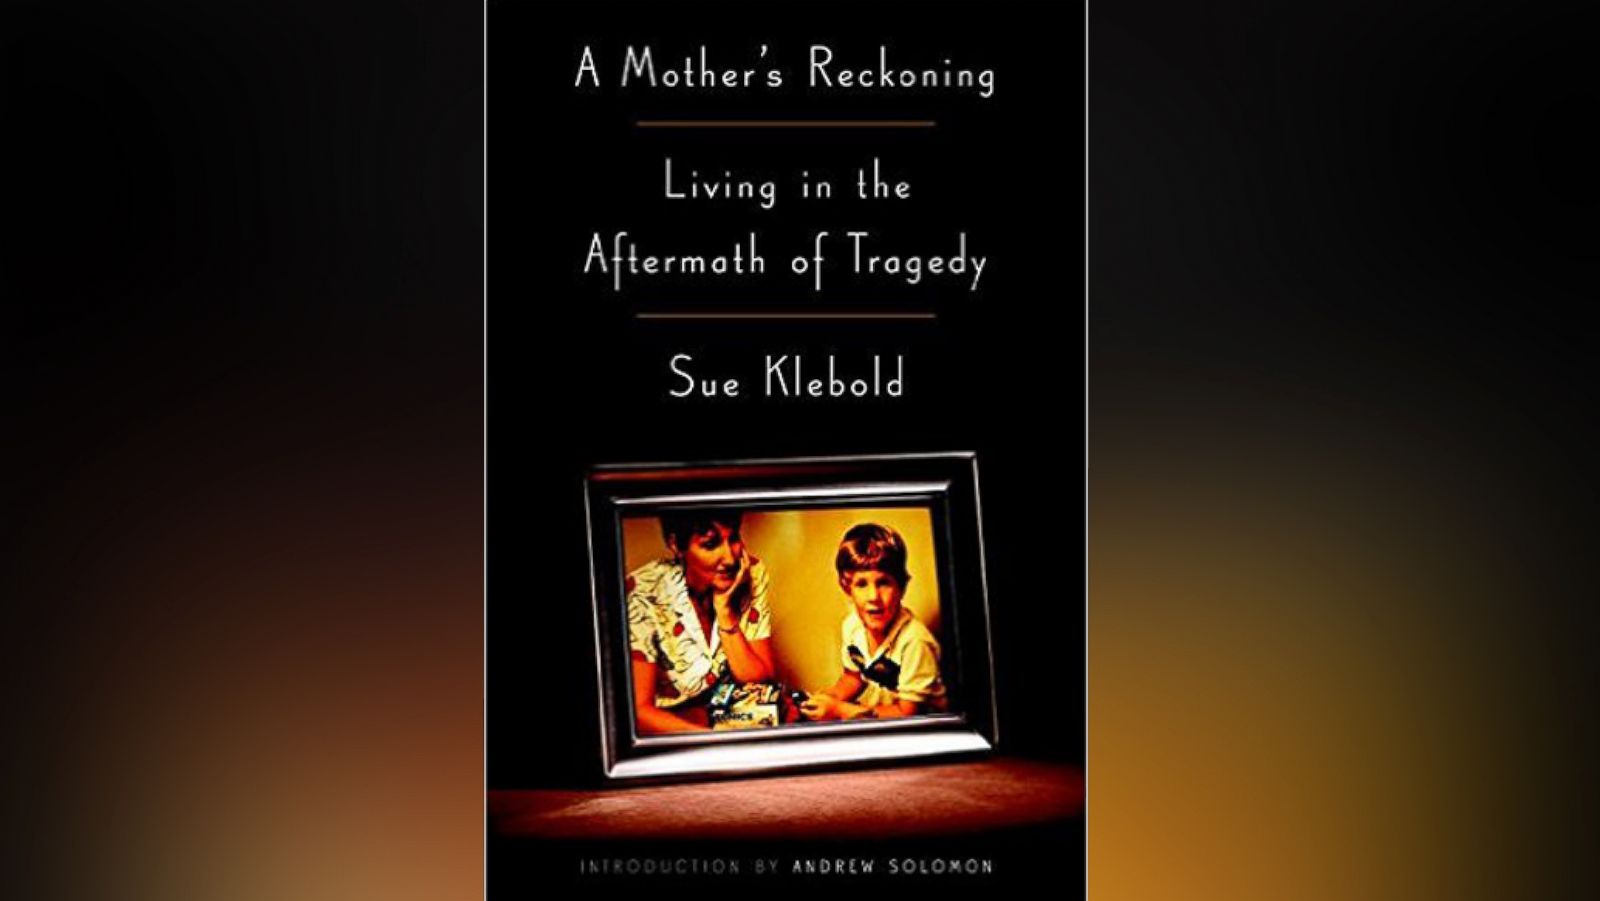 Book Excerpt: Sue Klebold's 'A Mother's Reckoning'